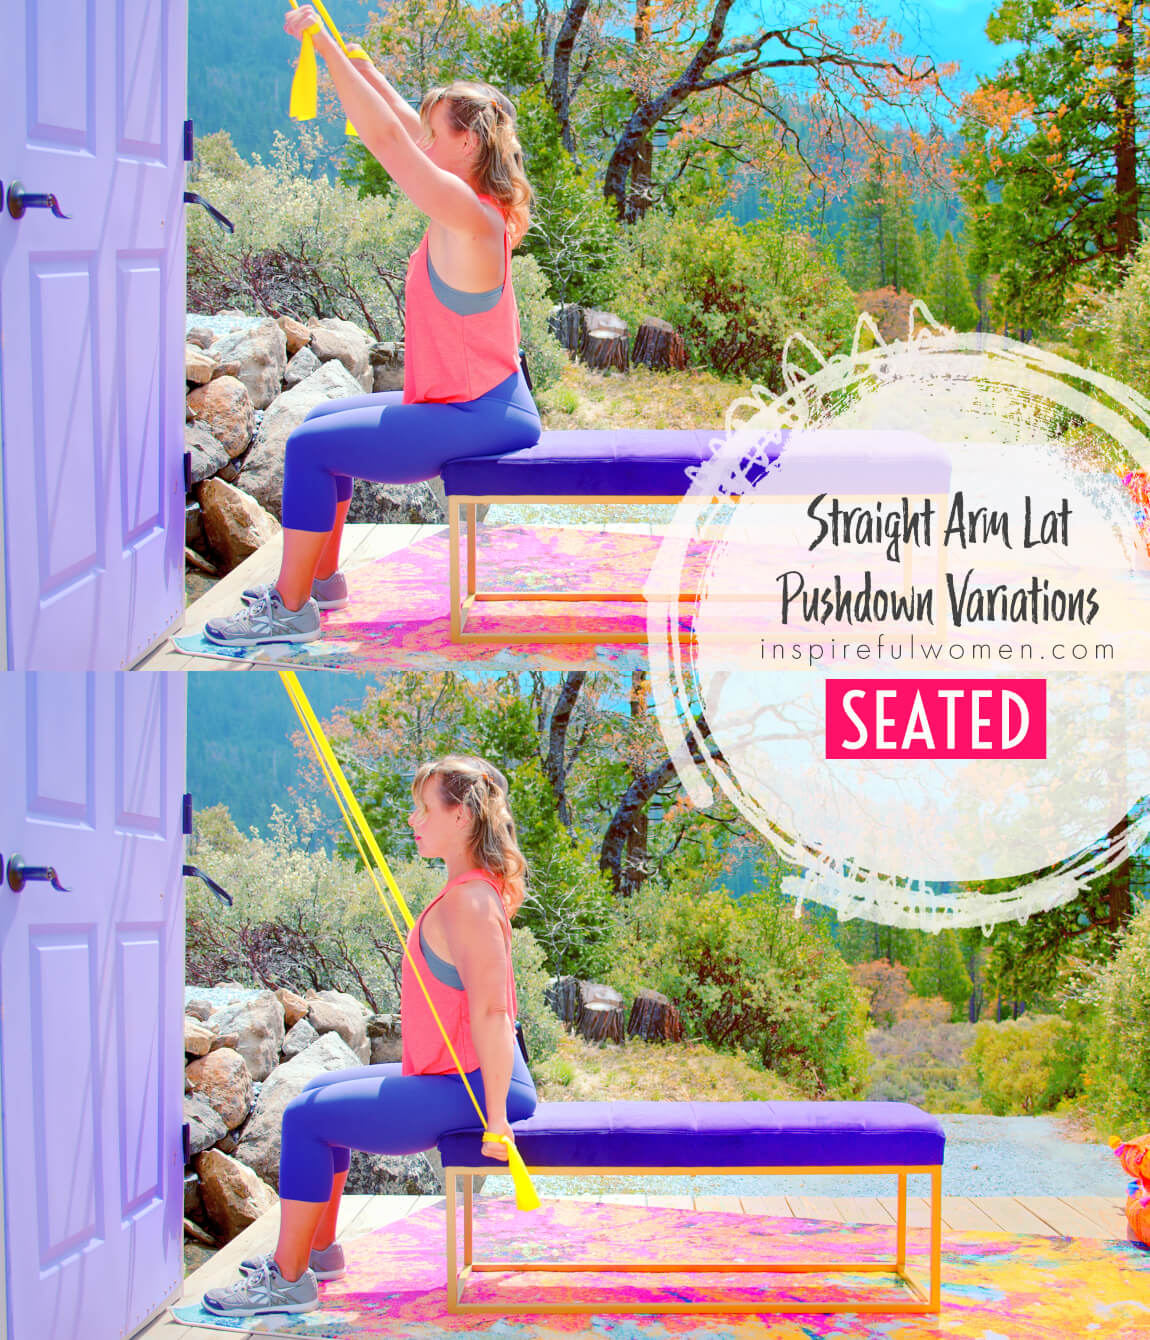 seated-straight-arm-standing-lat-pushdown-back-exercise-variation